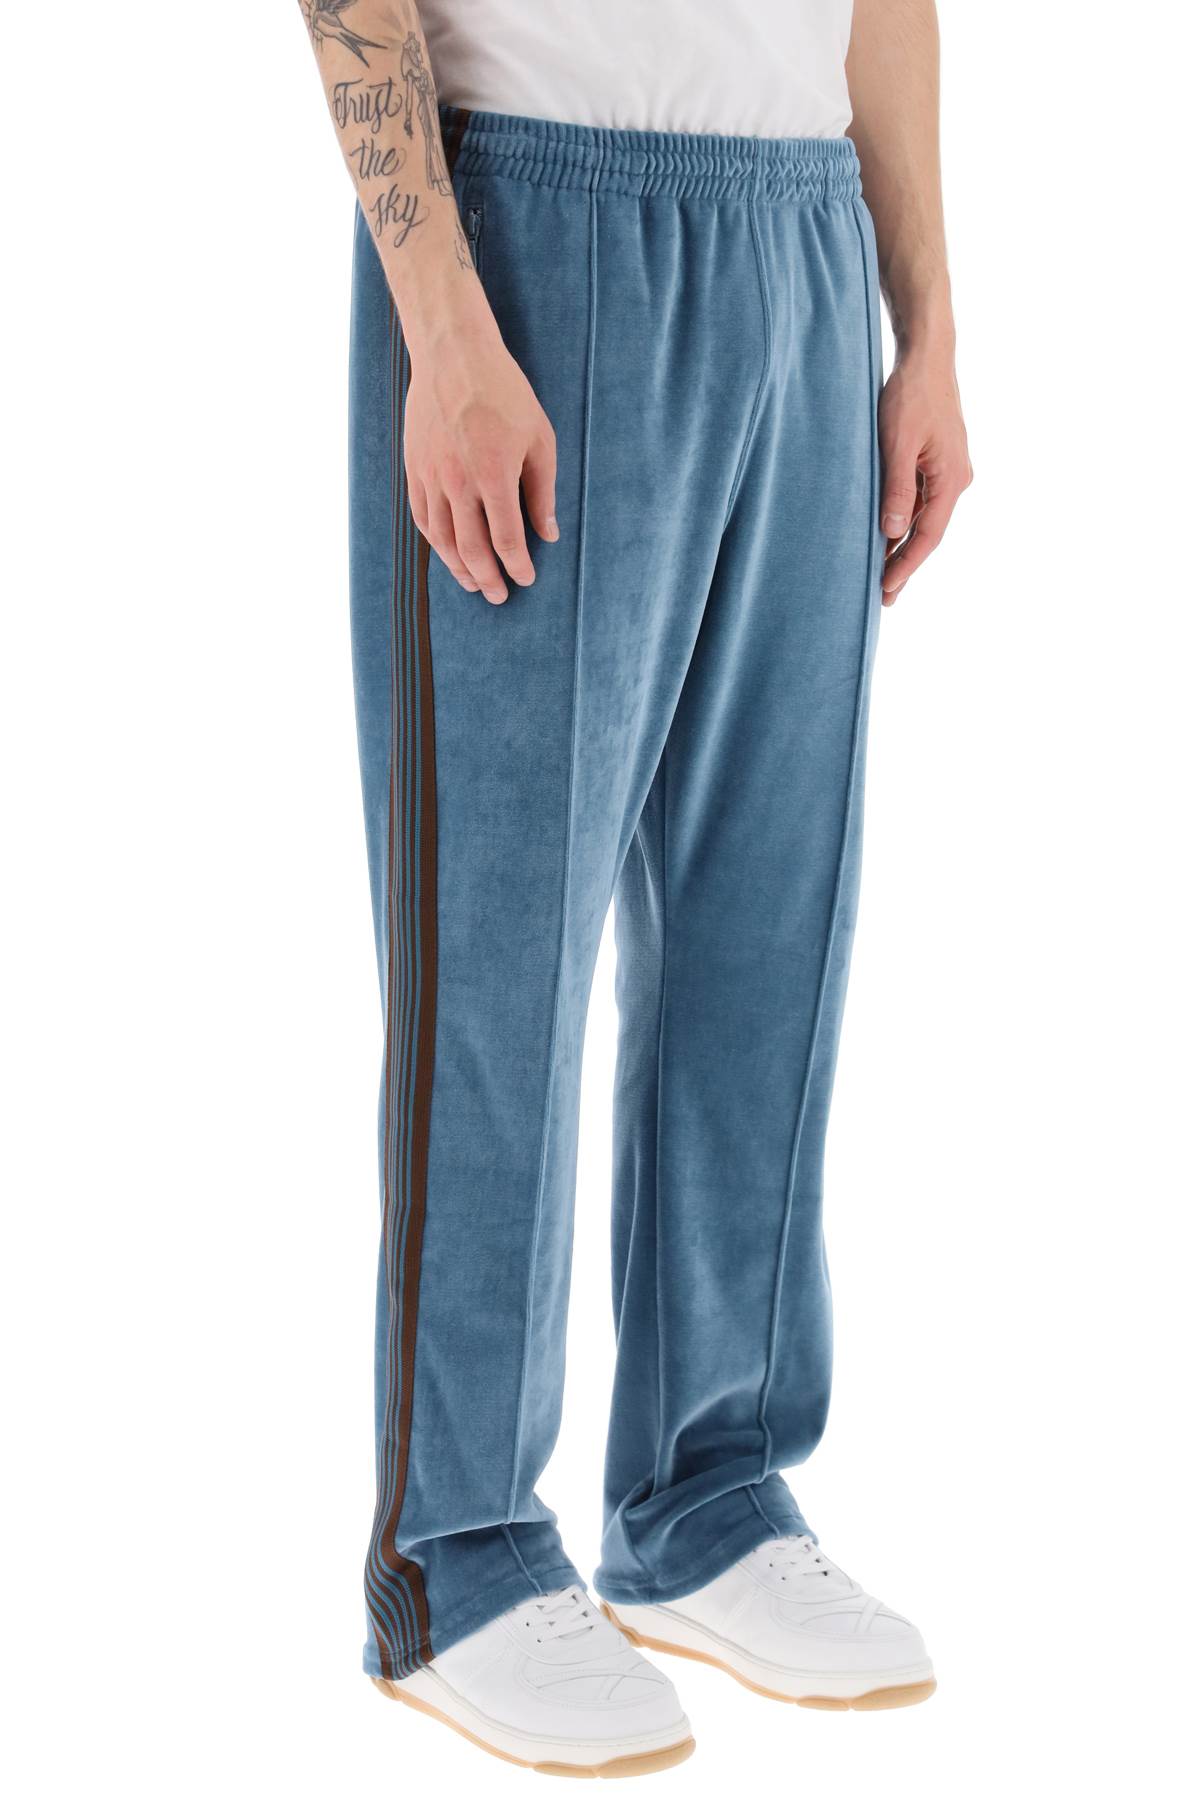 Needles Blue Embroidered Track Trousers In Light Blue,brown   ModeSens